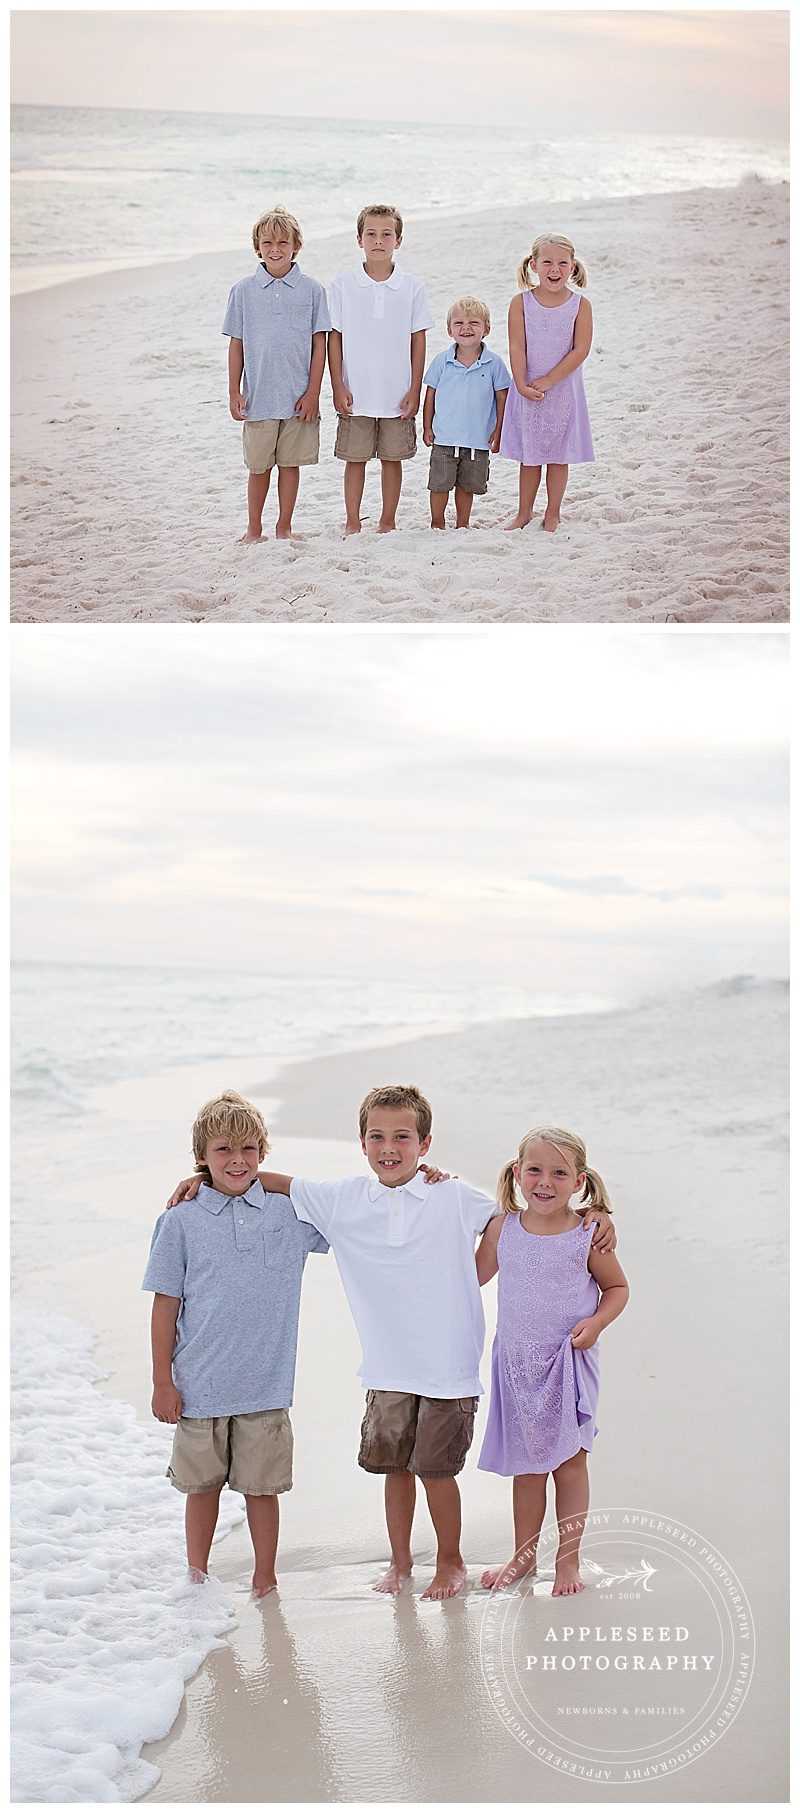 Rogers Kids | Family Photographer | Appleseed Photography